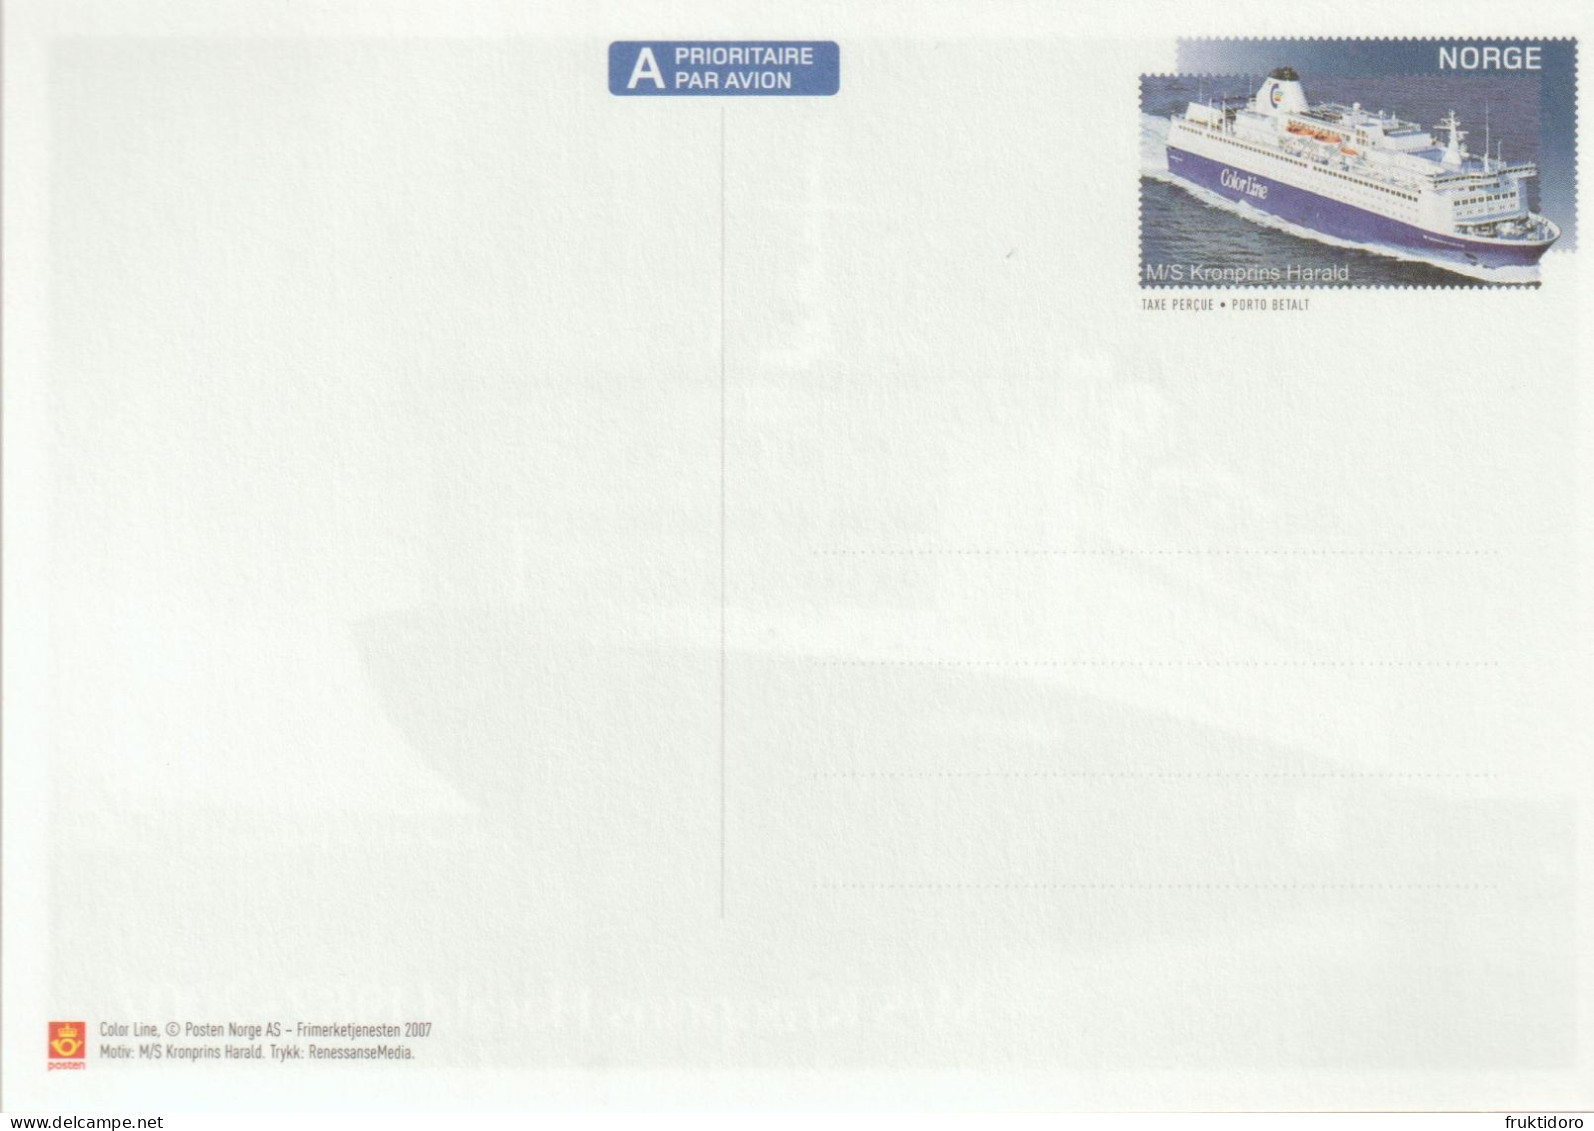 Norway Postal Stationery 2007 Ship M/S Crown Prince Haral 1987-2007 ** - Ganzsachen